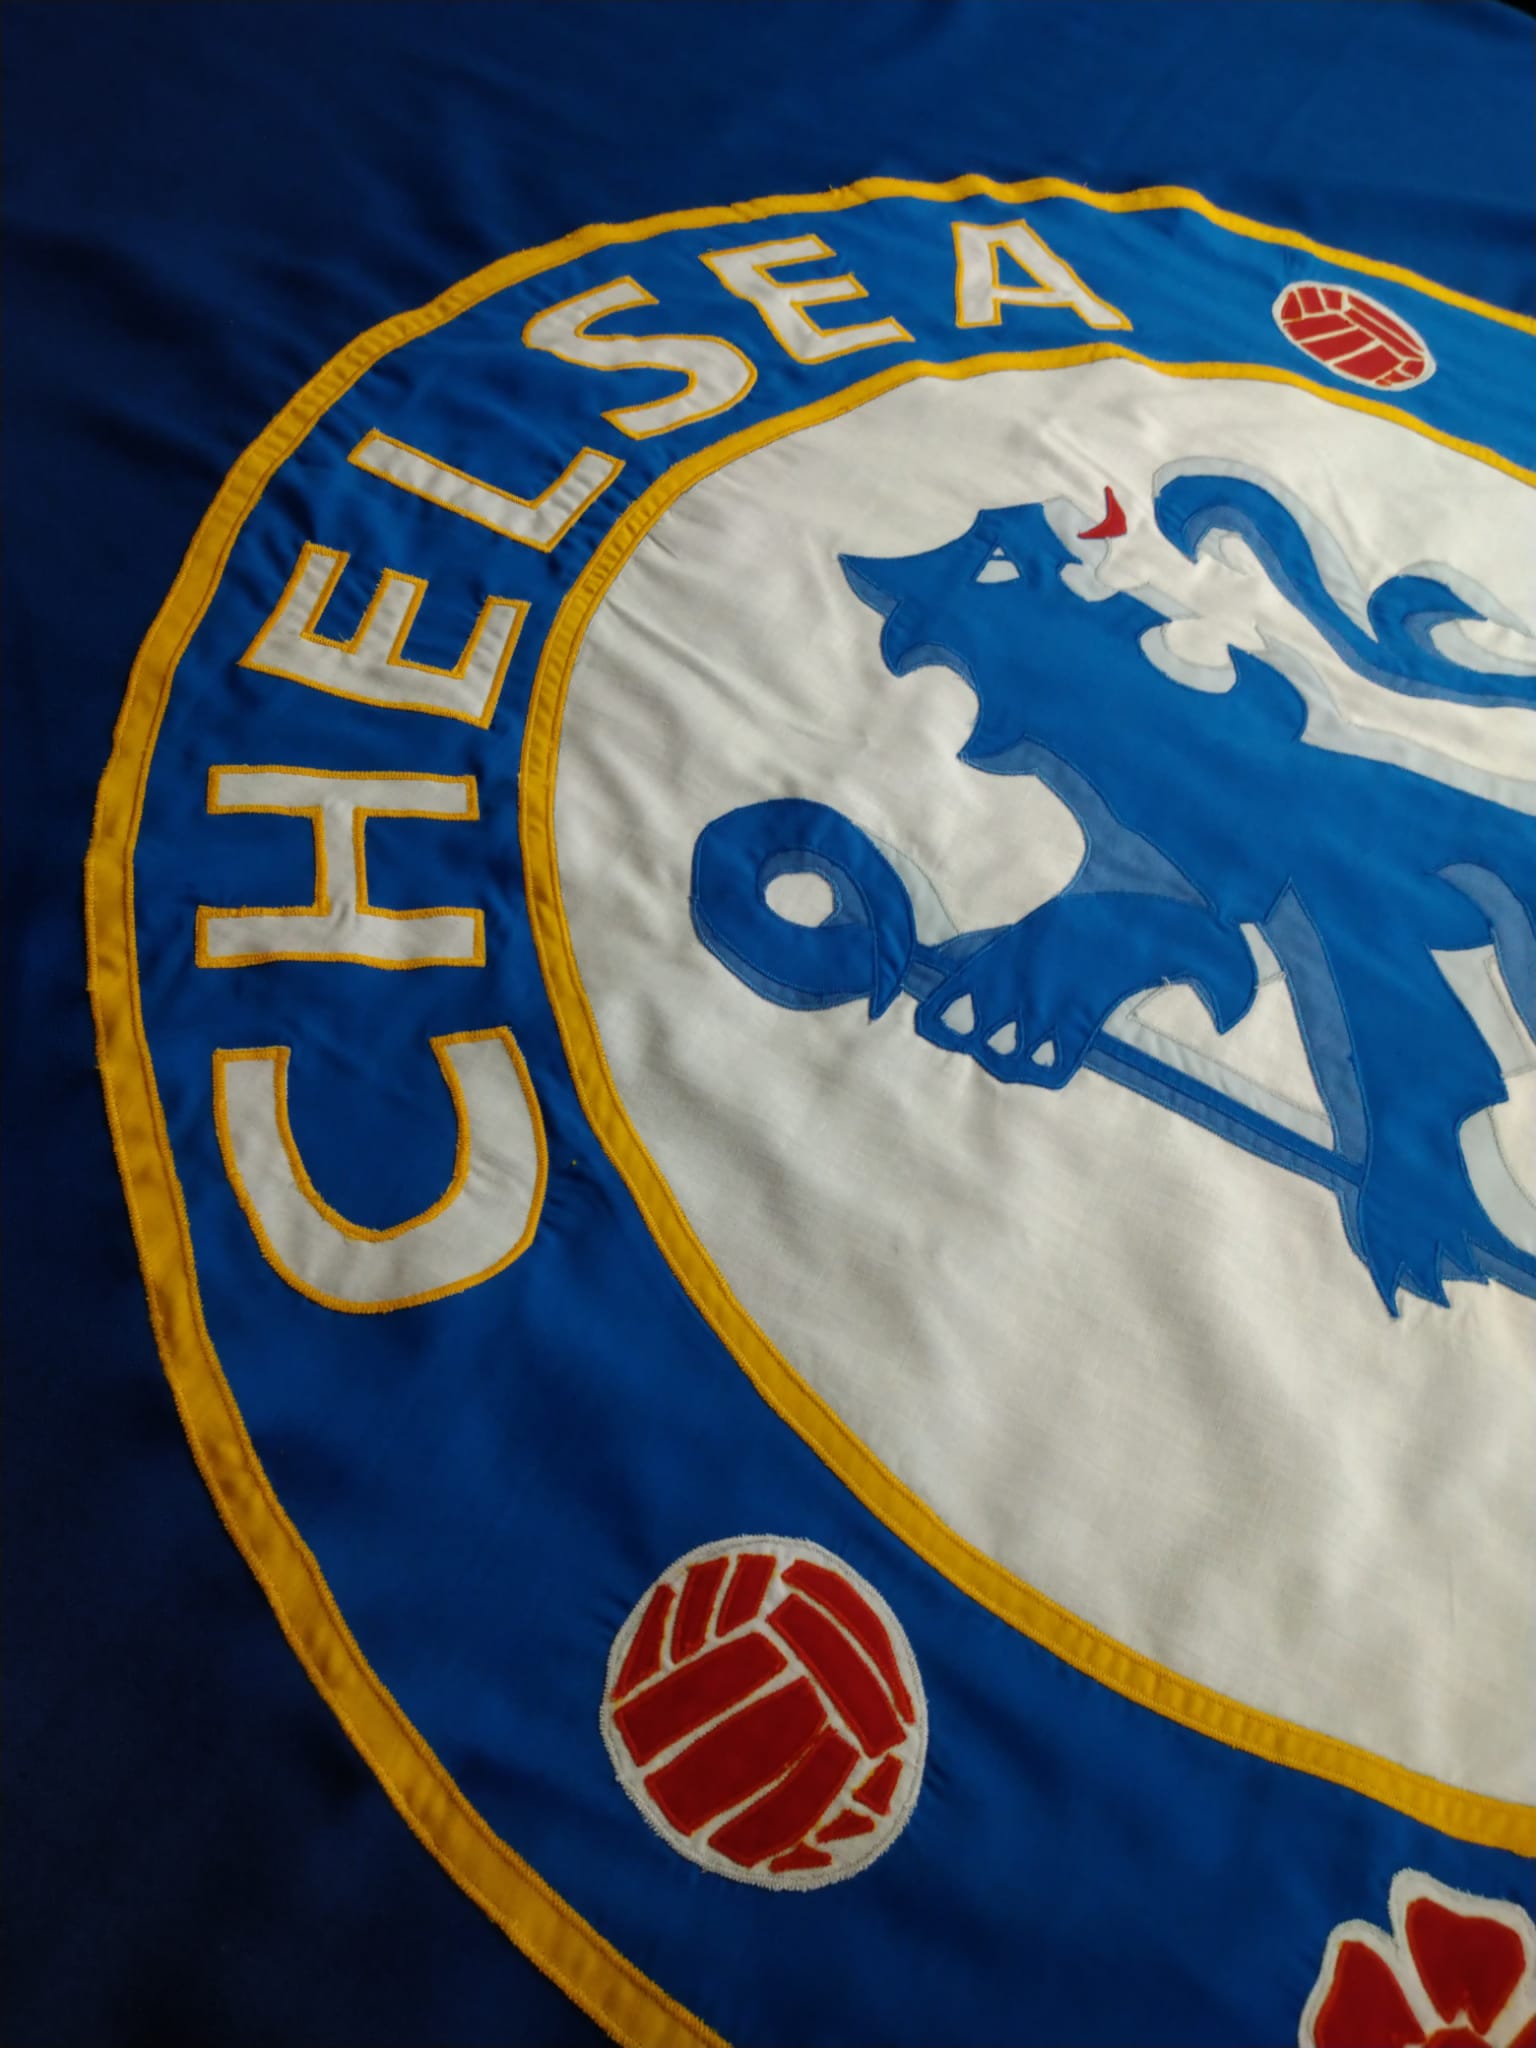 Chelsea FC stitched coffin drape by Flag Studio